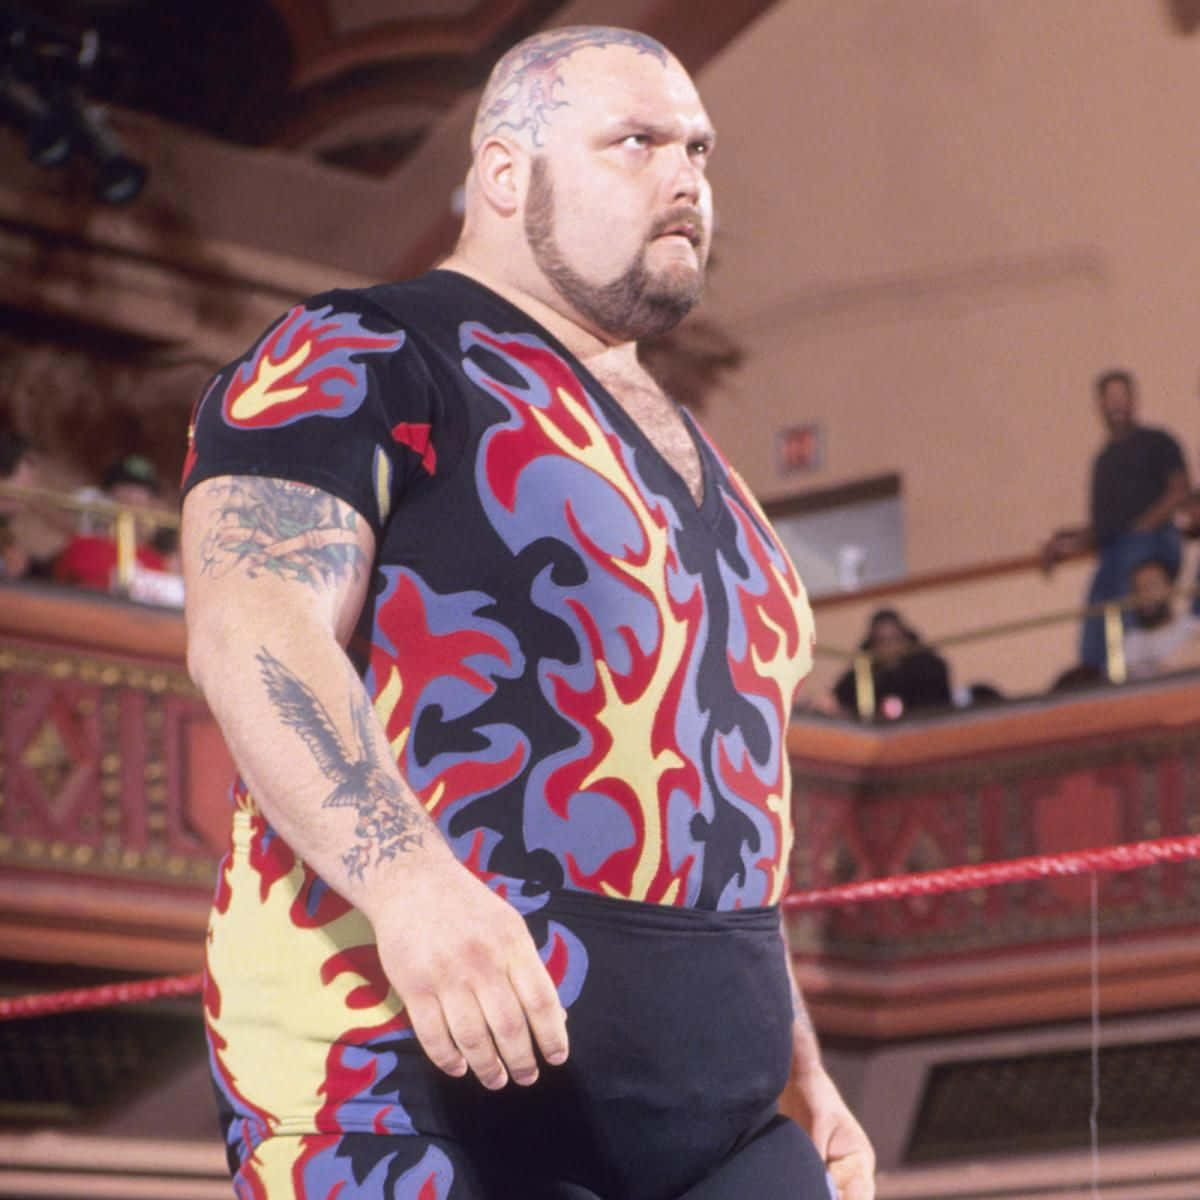 Who is Bam Bam Bigelow  Quora